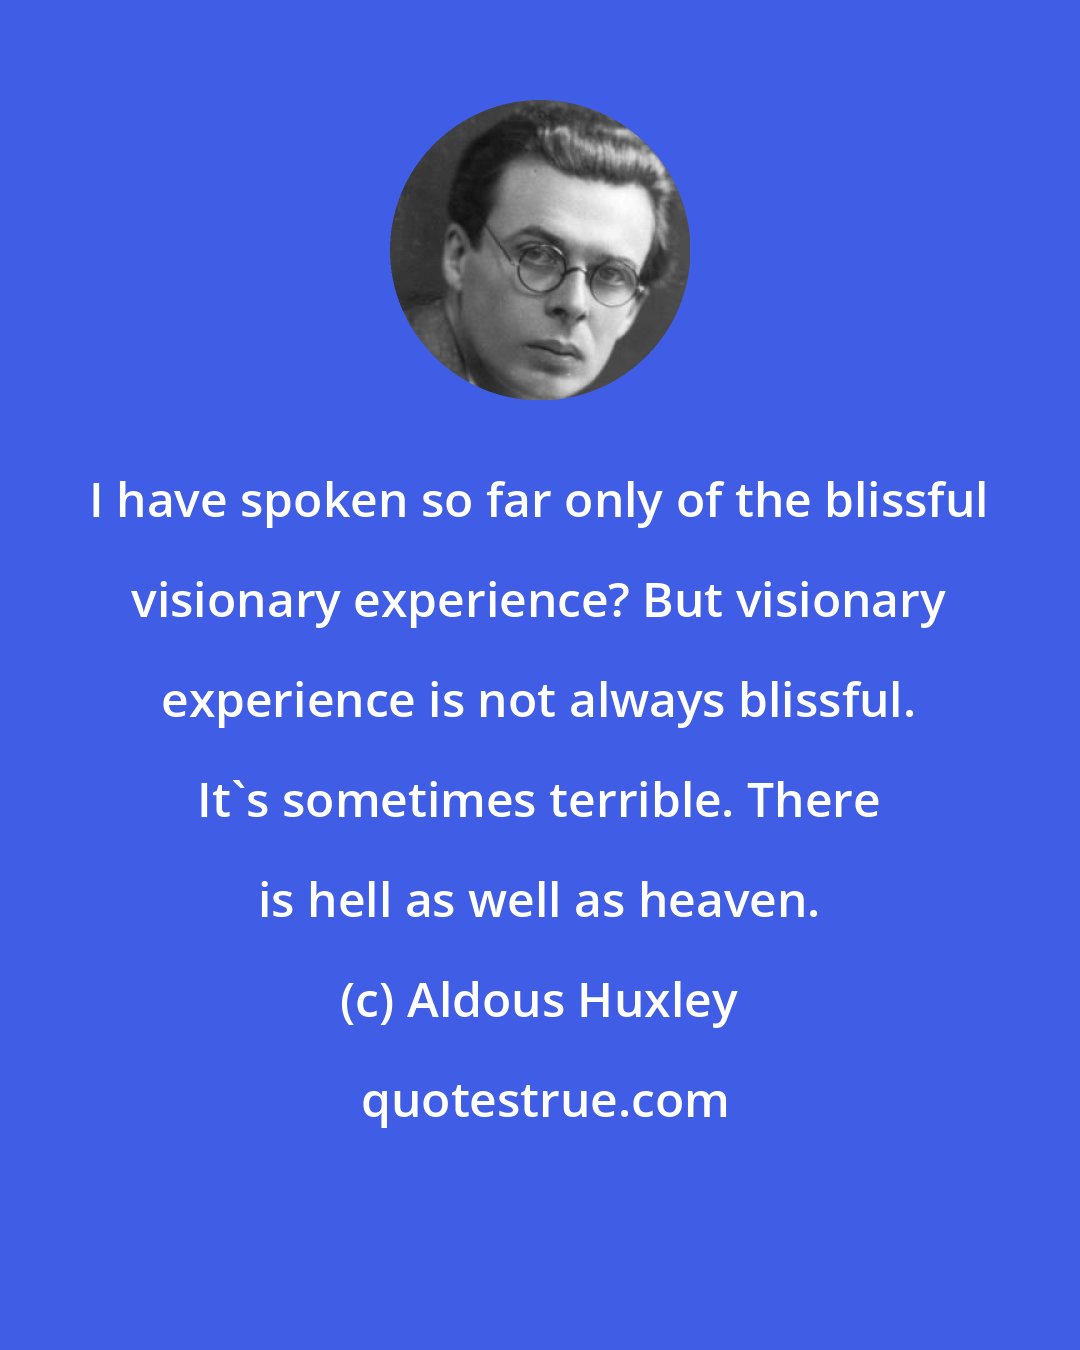 Aldous Huxley: I have spoken so far only of the blissful visionary experience? But visionary experience is not always blissful. It's sometimes terrible. There is hell as well as heaven.